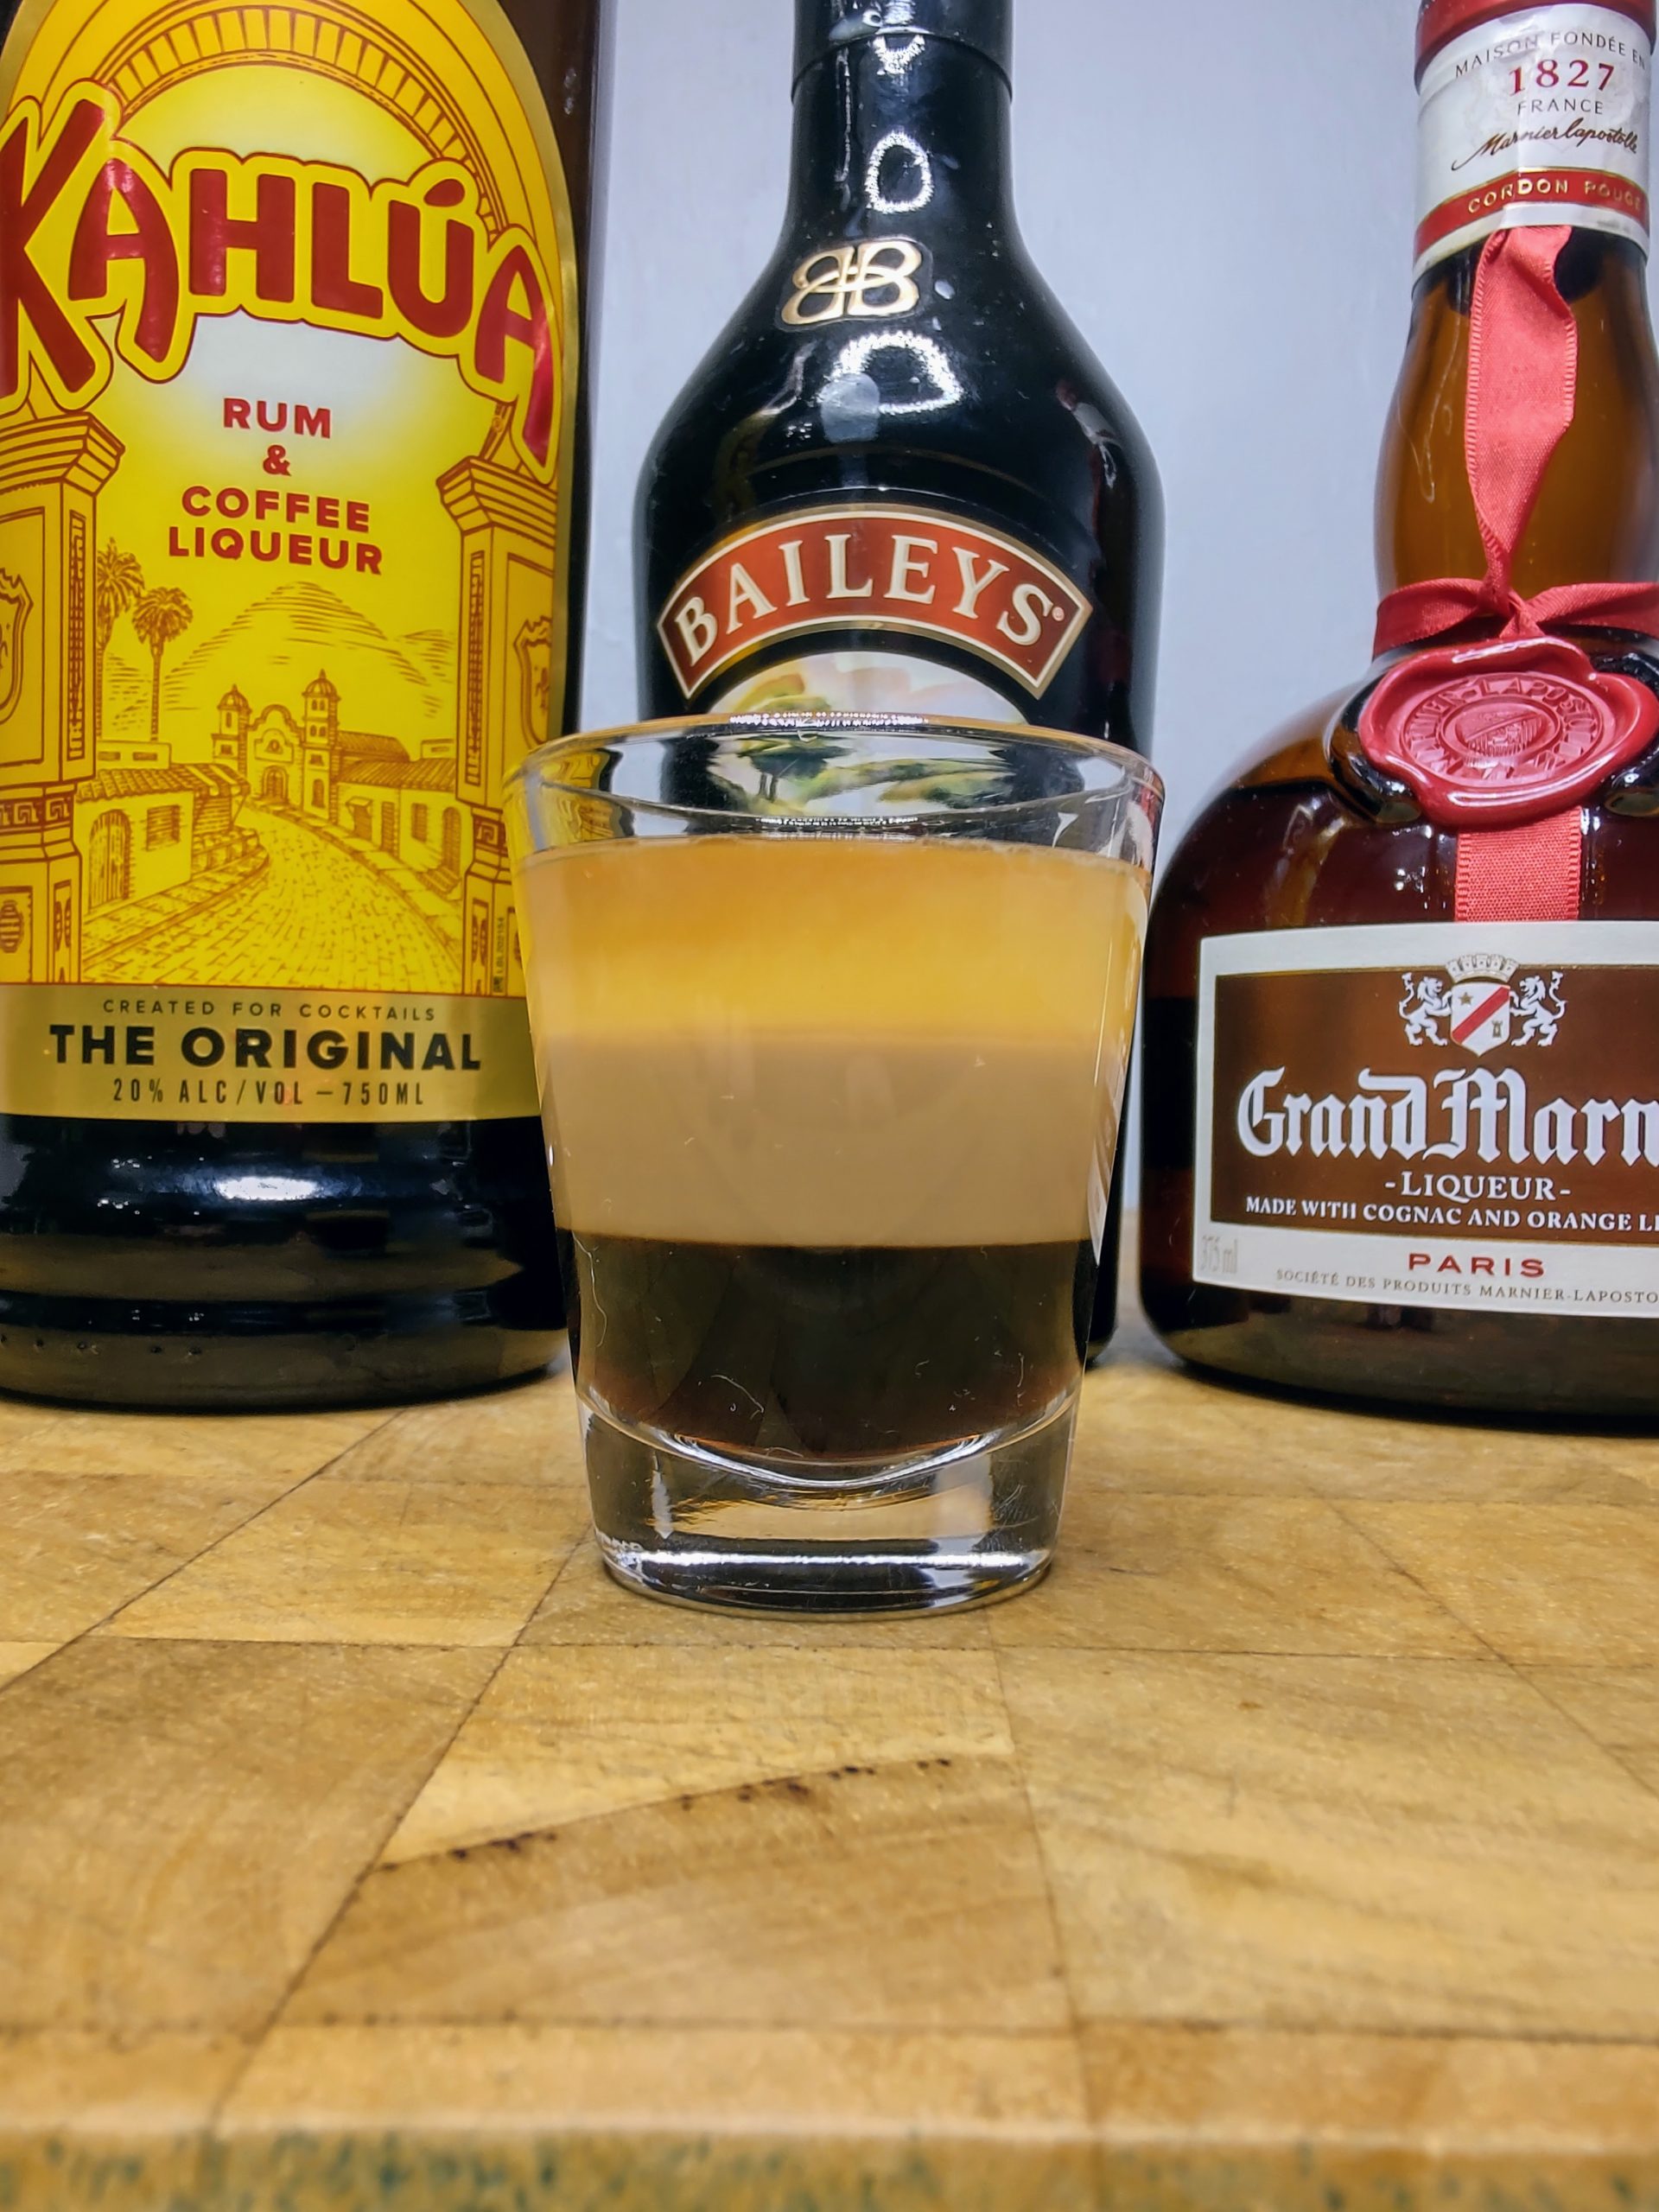 B-52 shot with ingredients behind the glass